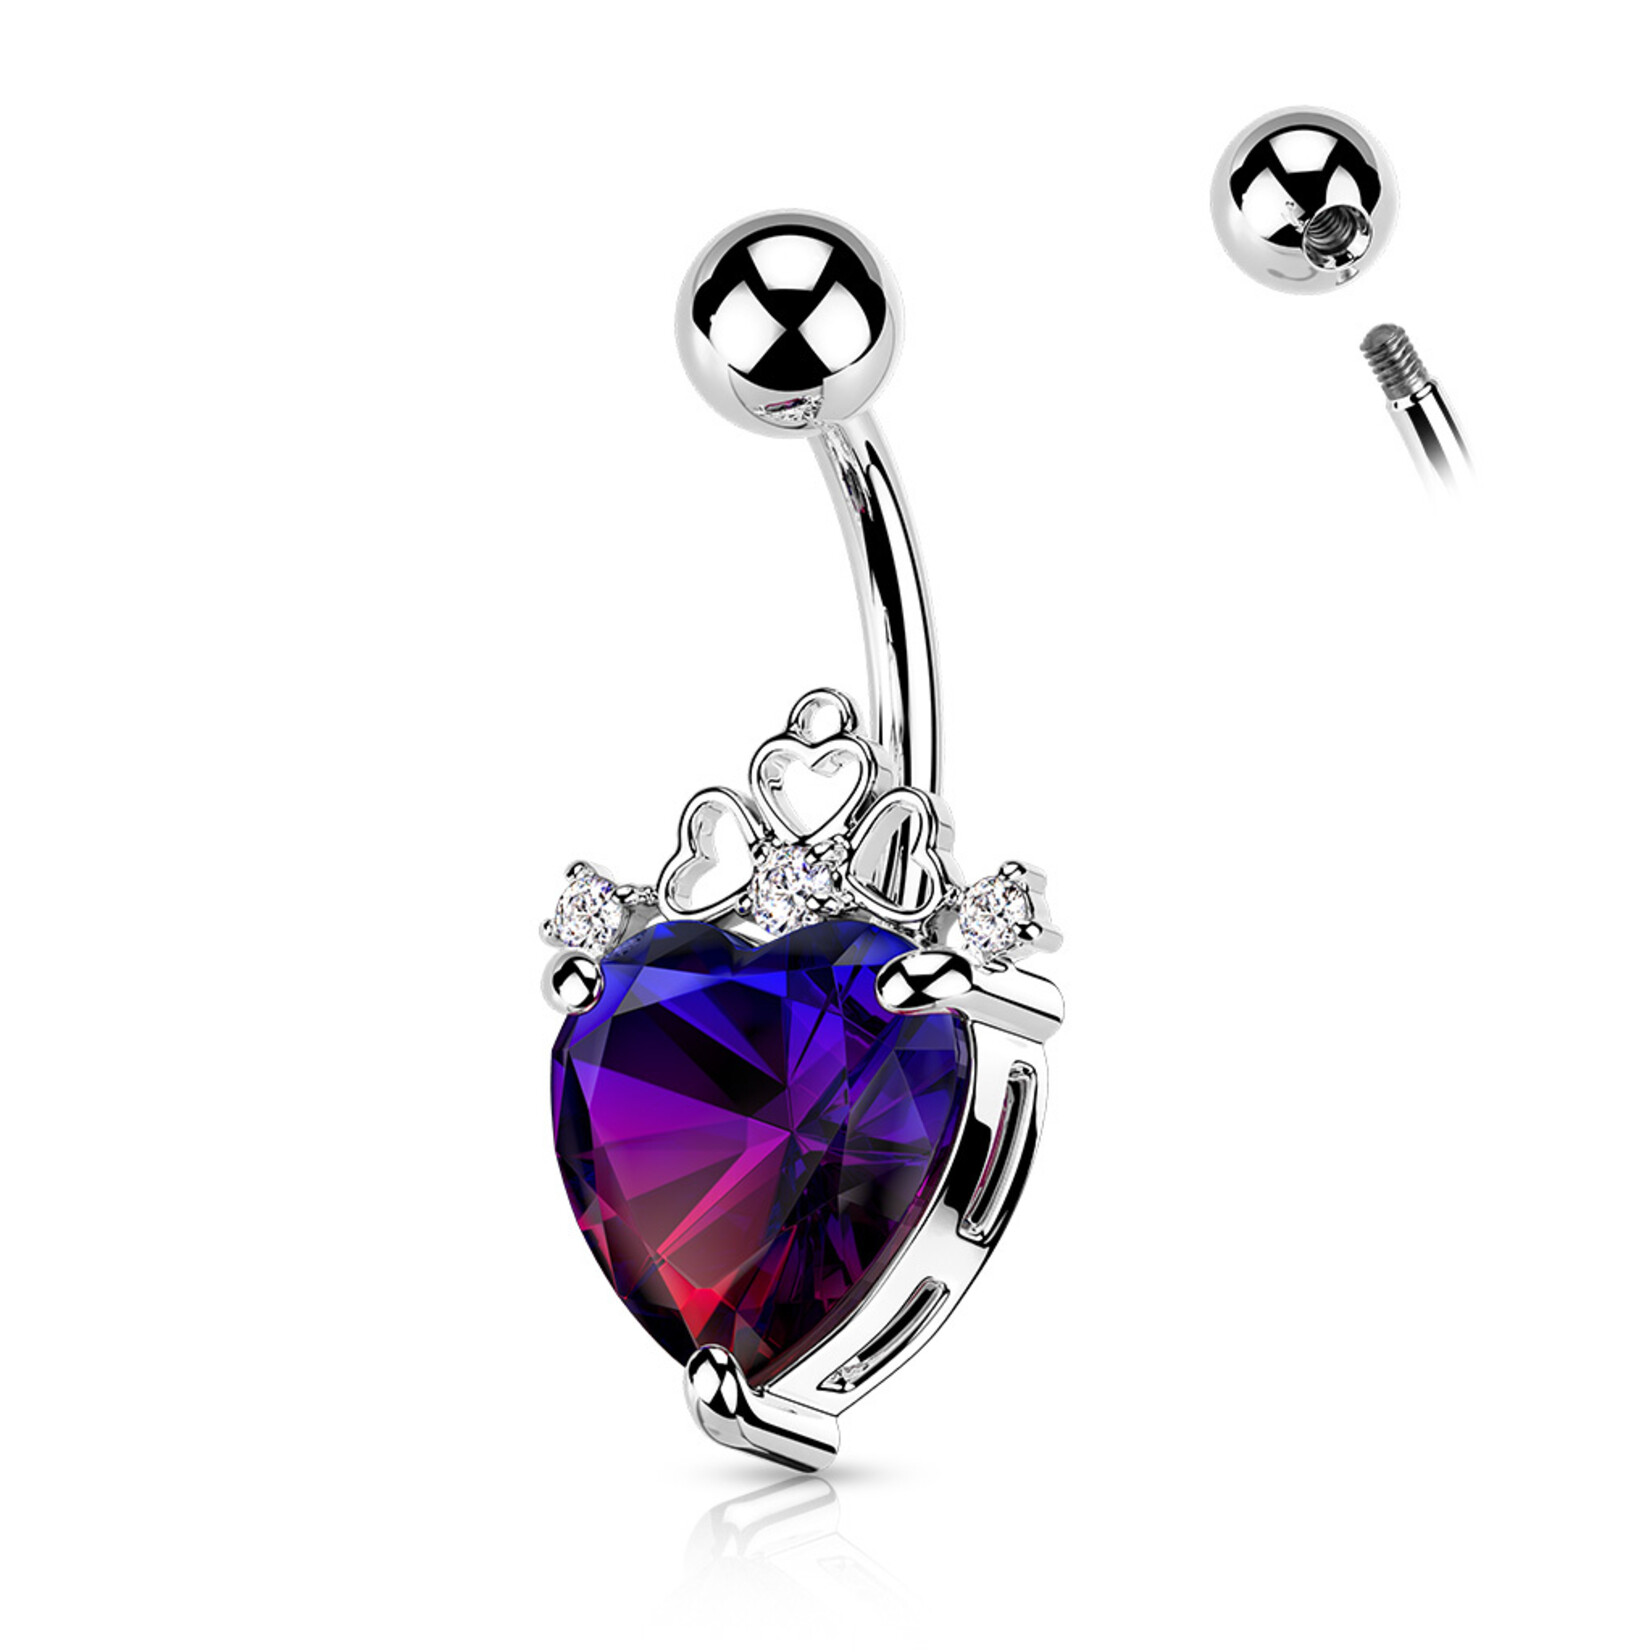 Body Jewelry Heart Crystal Navel Ring